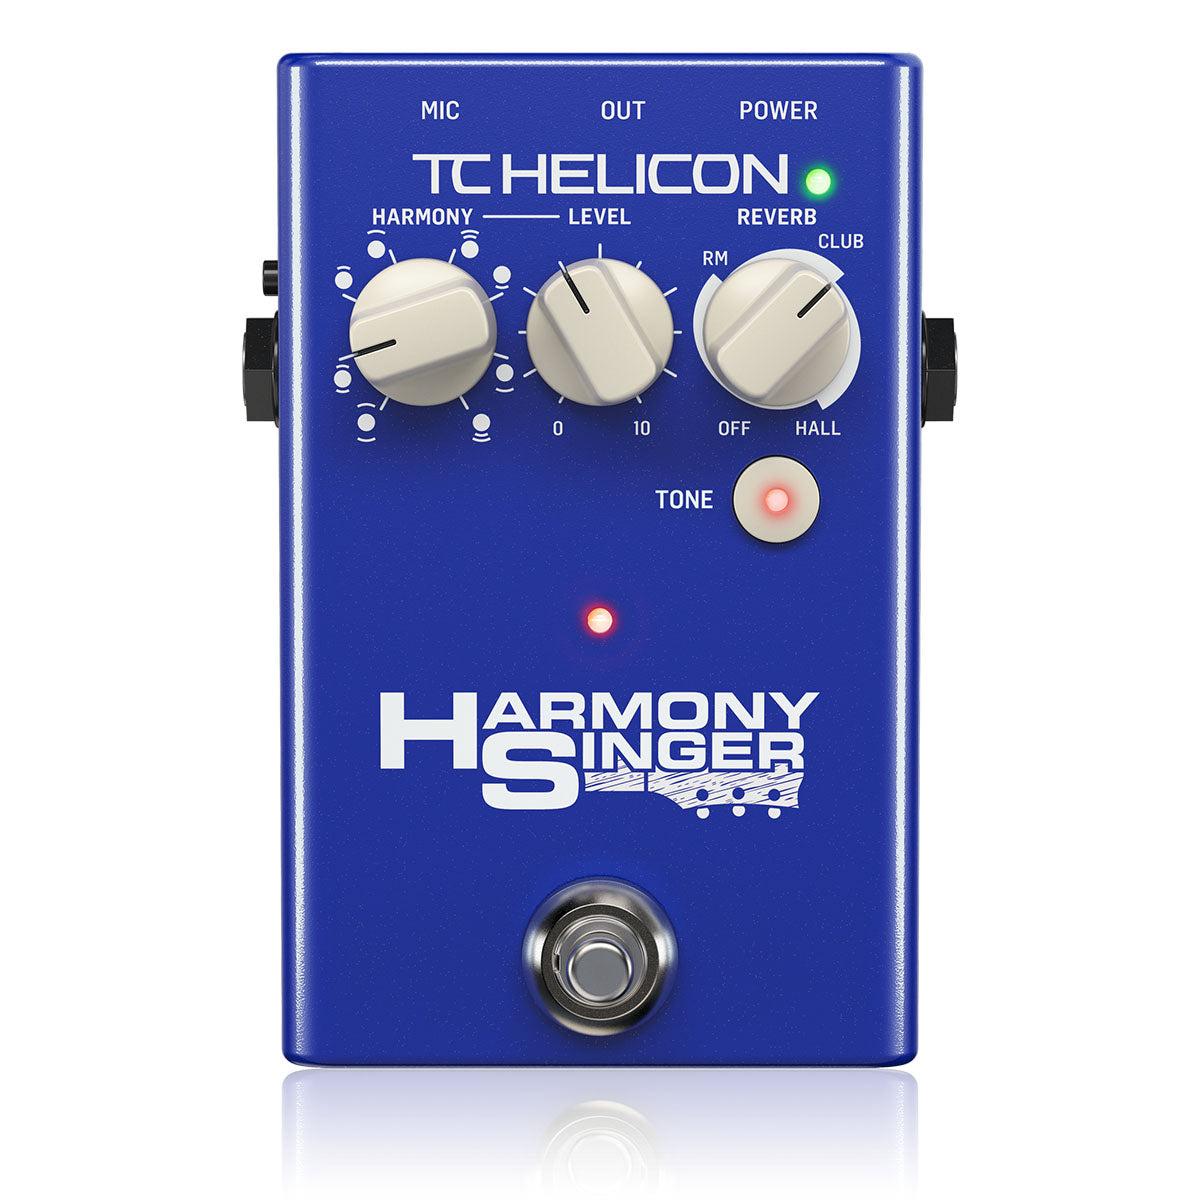 TC Helicon Harmony Singer 2 Guitar Controlled Vocal Effects Pedal